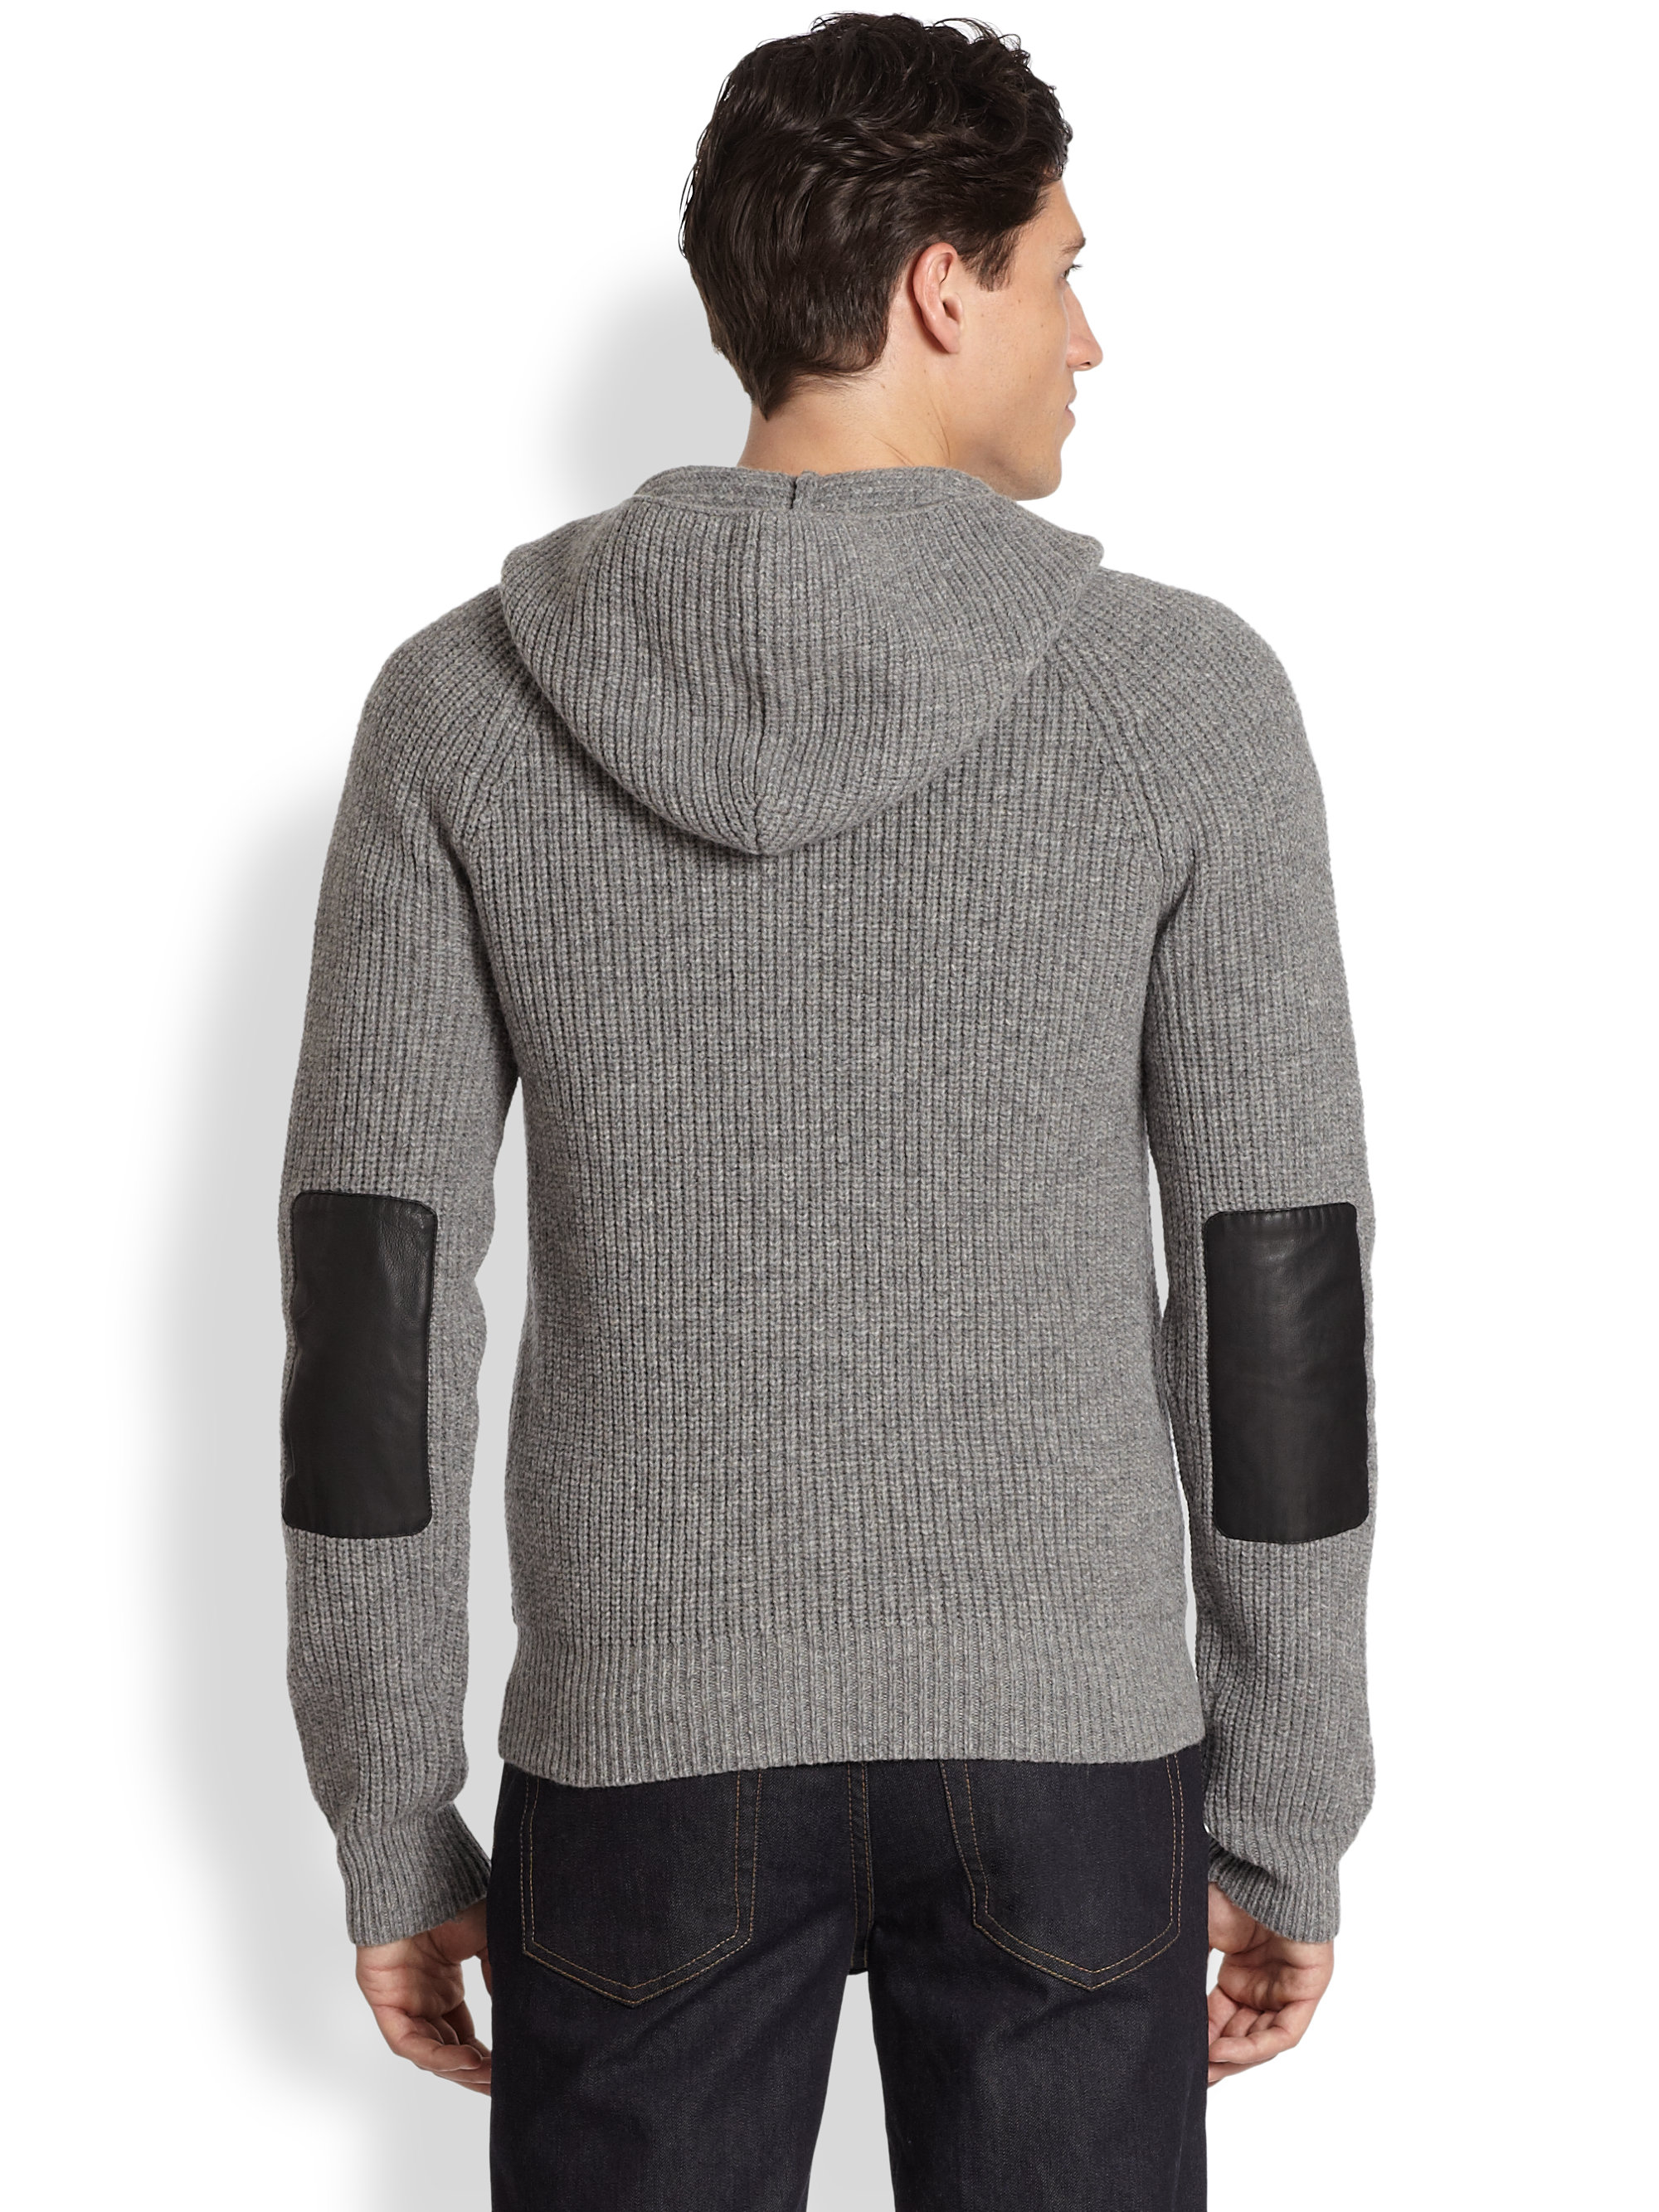 sweater with elbow patches